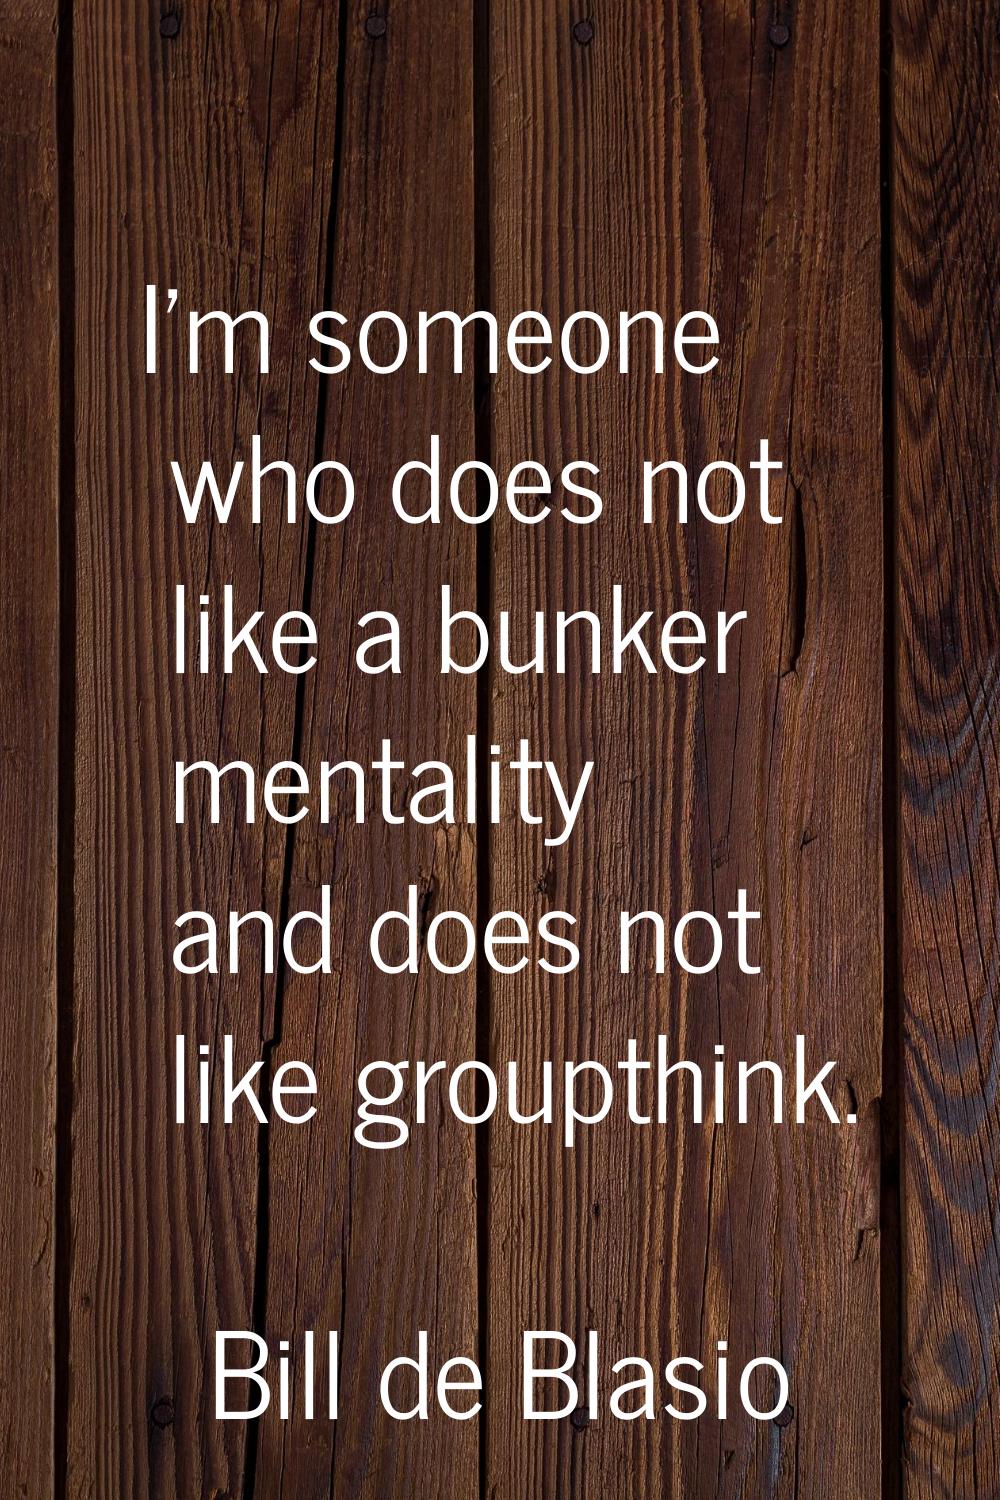 I'm someone who does not like a bunker mentality and does not like groupthink.